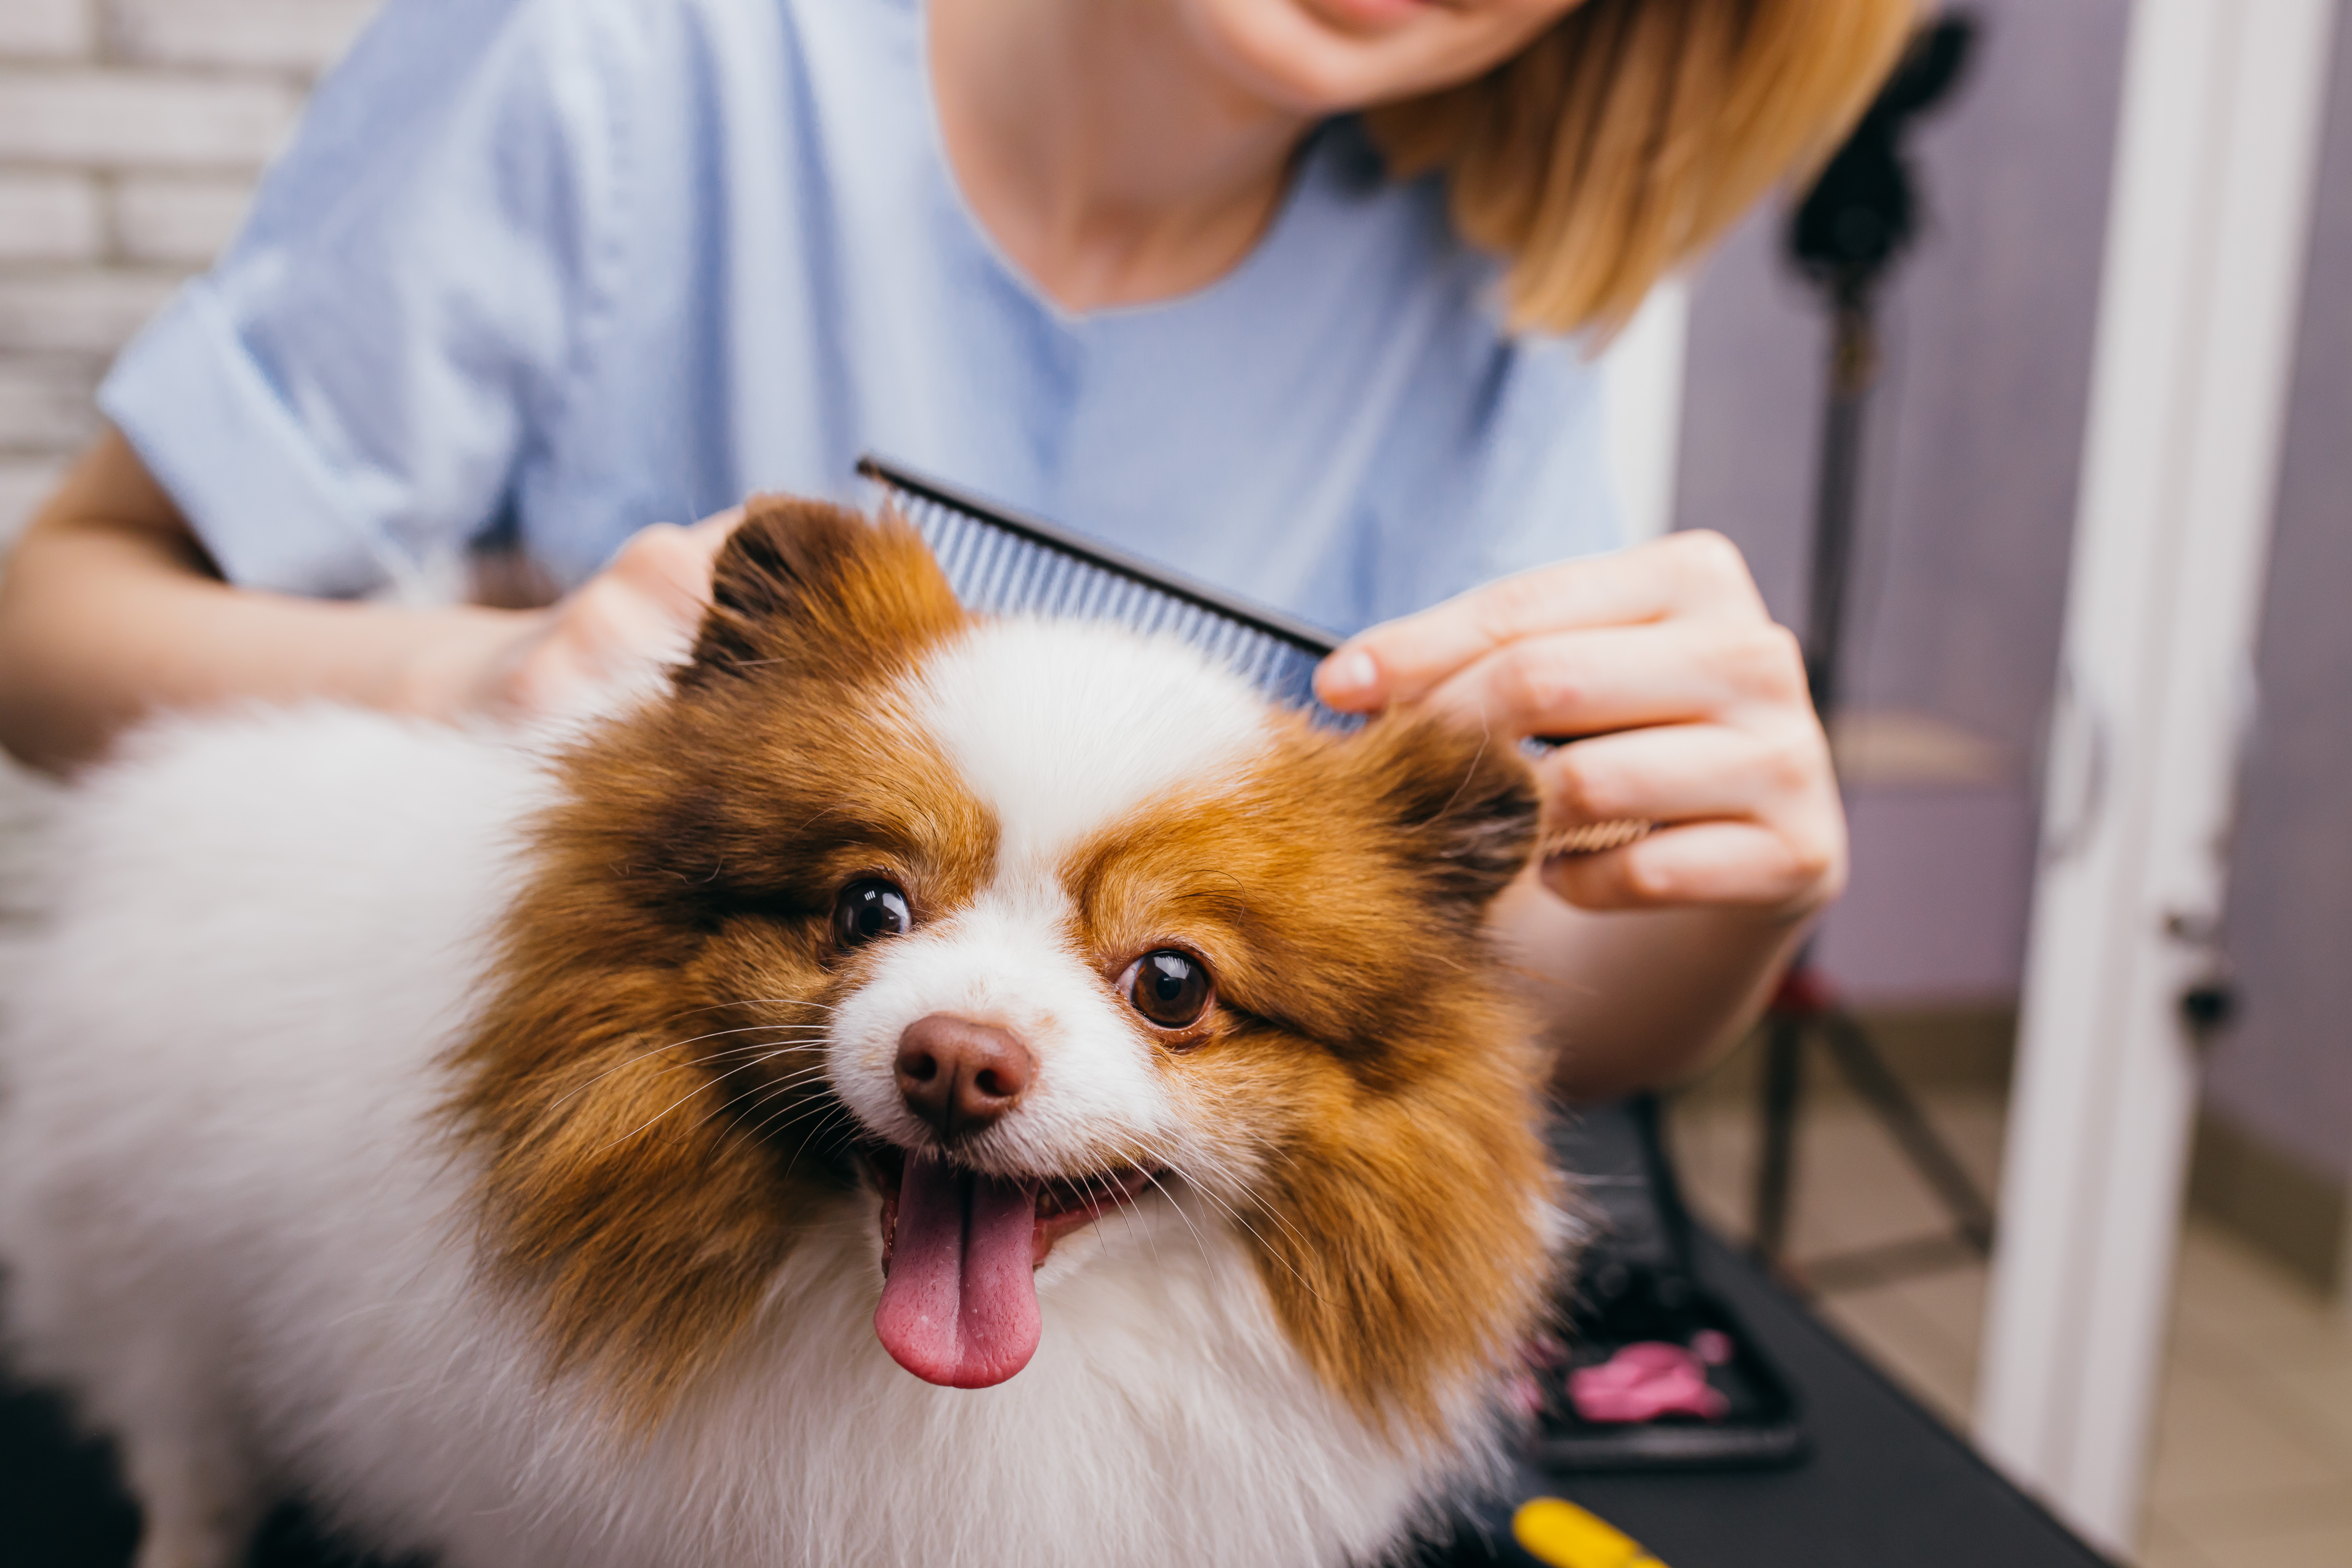 How to Sedate a Dog for a Haircut | Cuteness